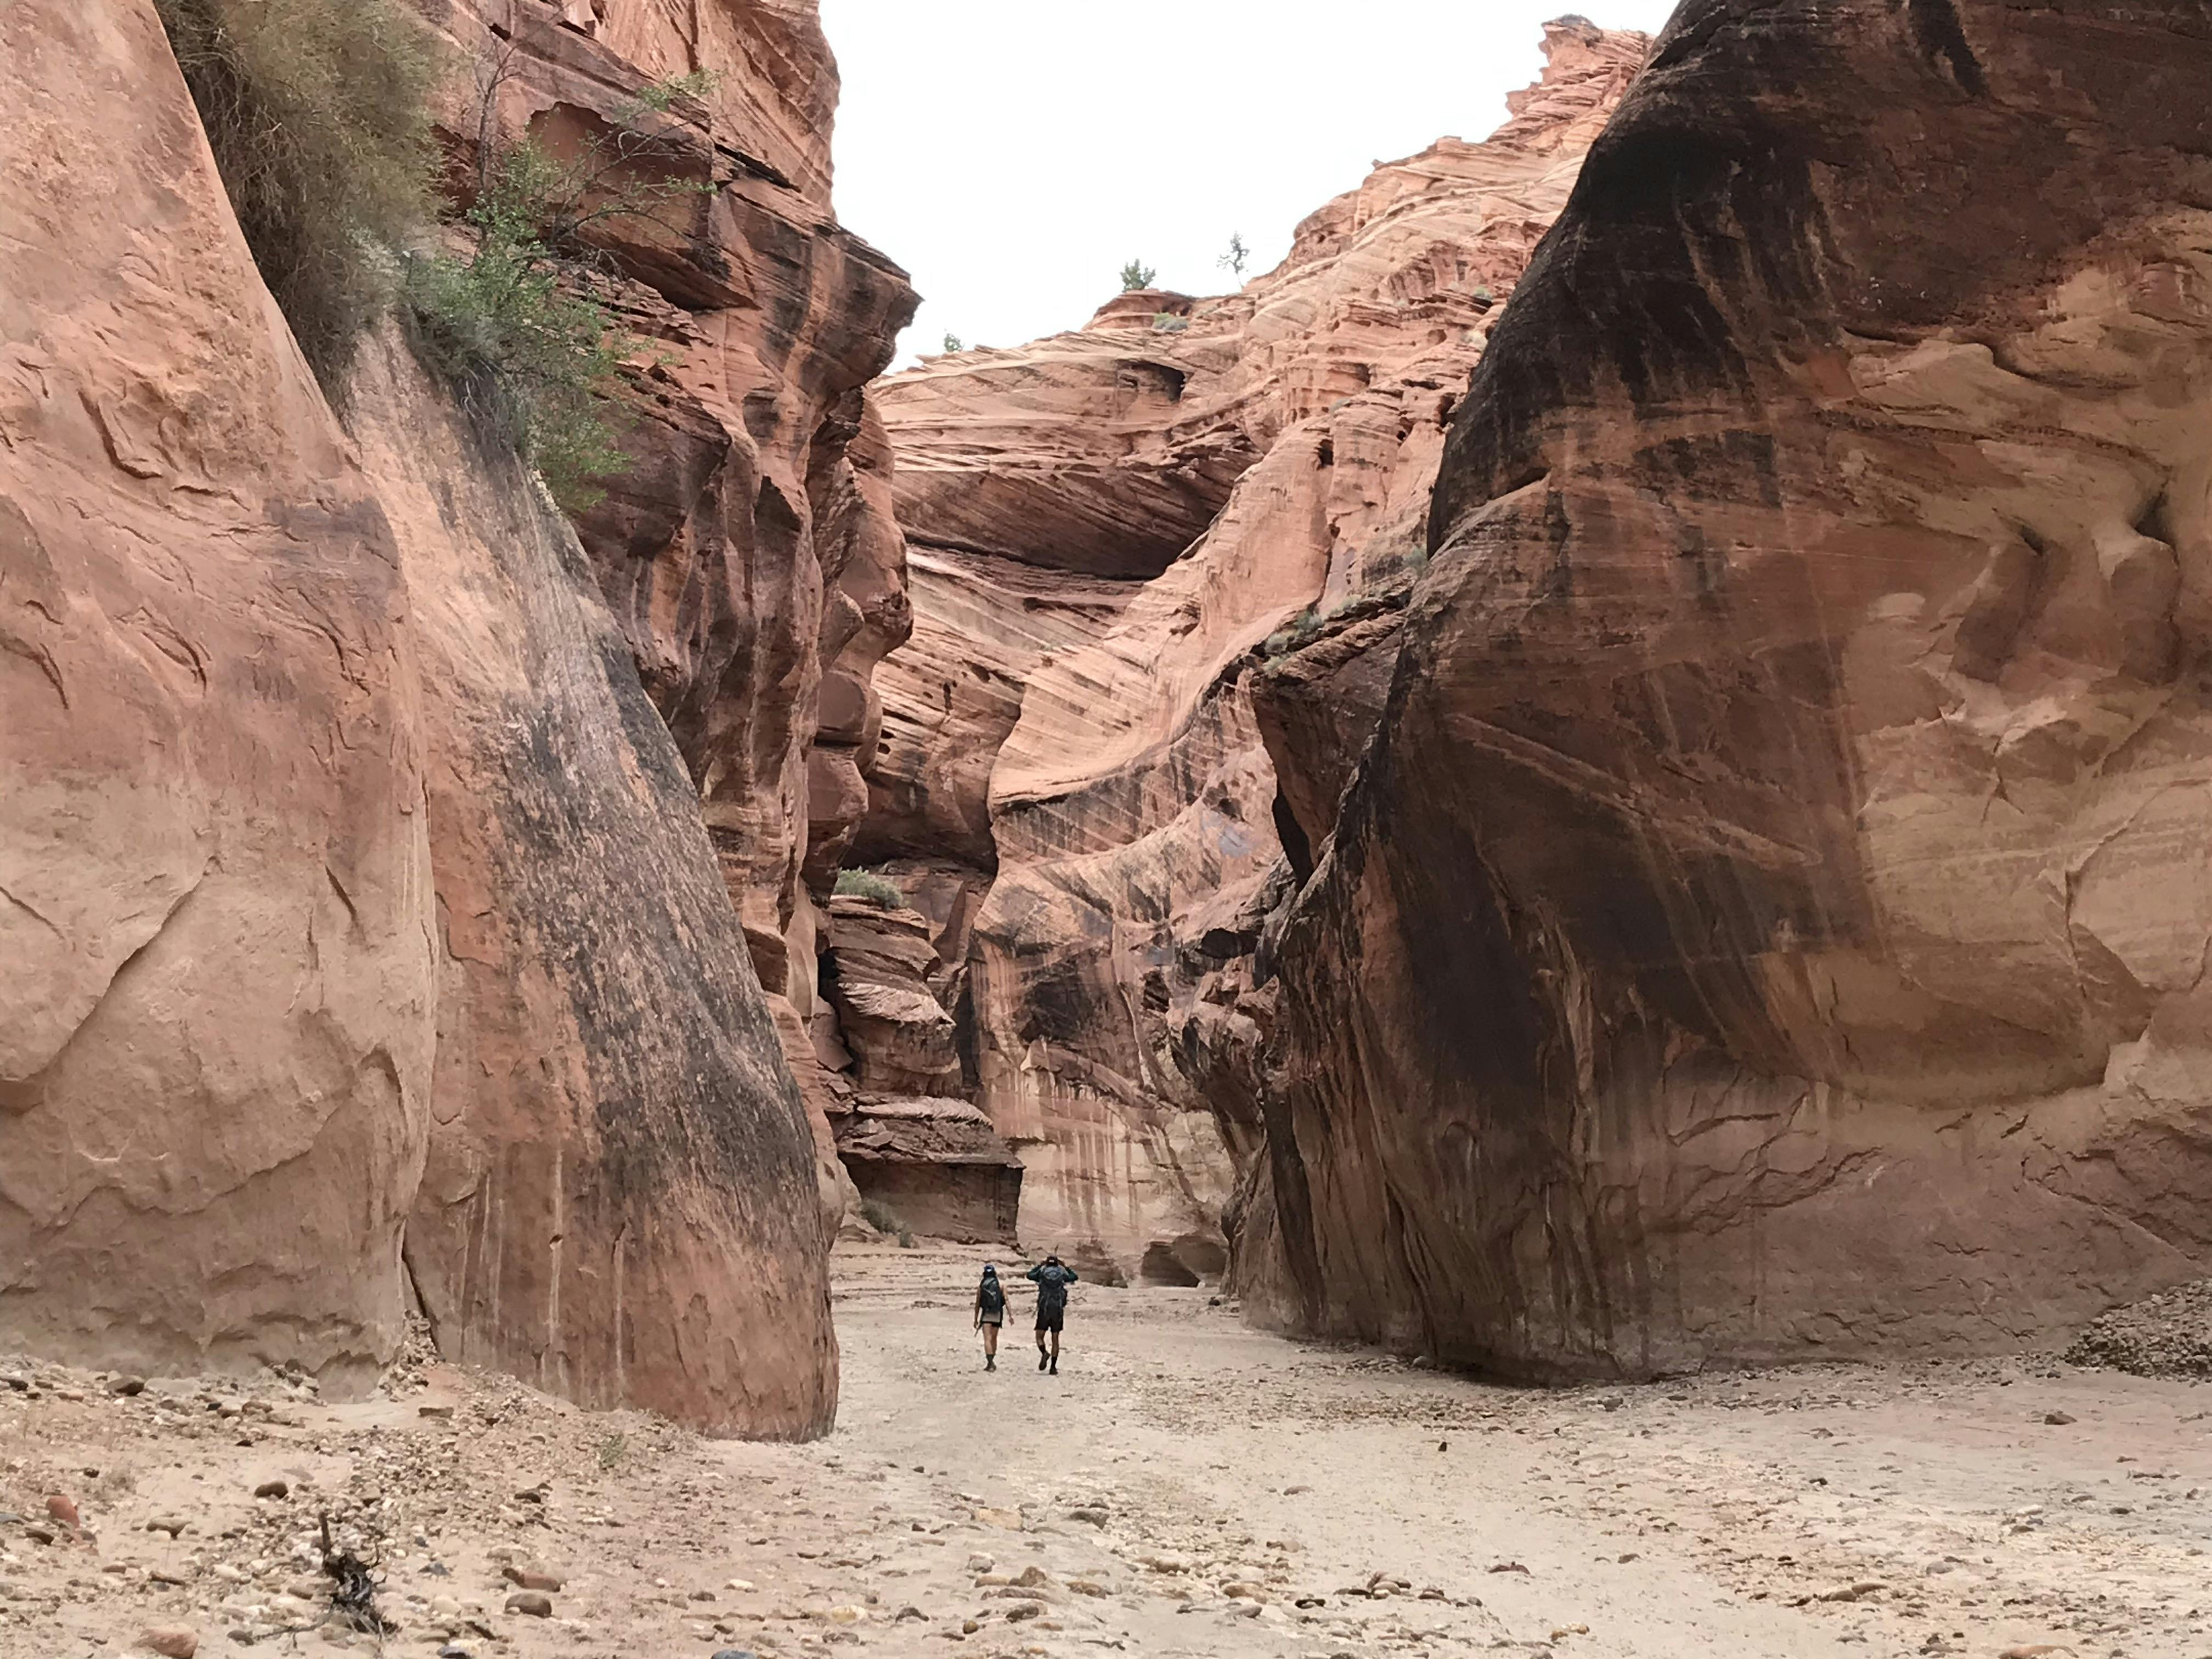 Hiking through a canyon in the desert in Oboz hiking shoes 